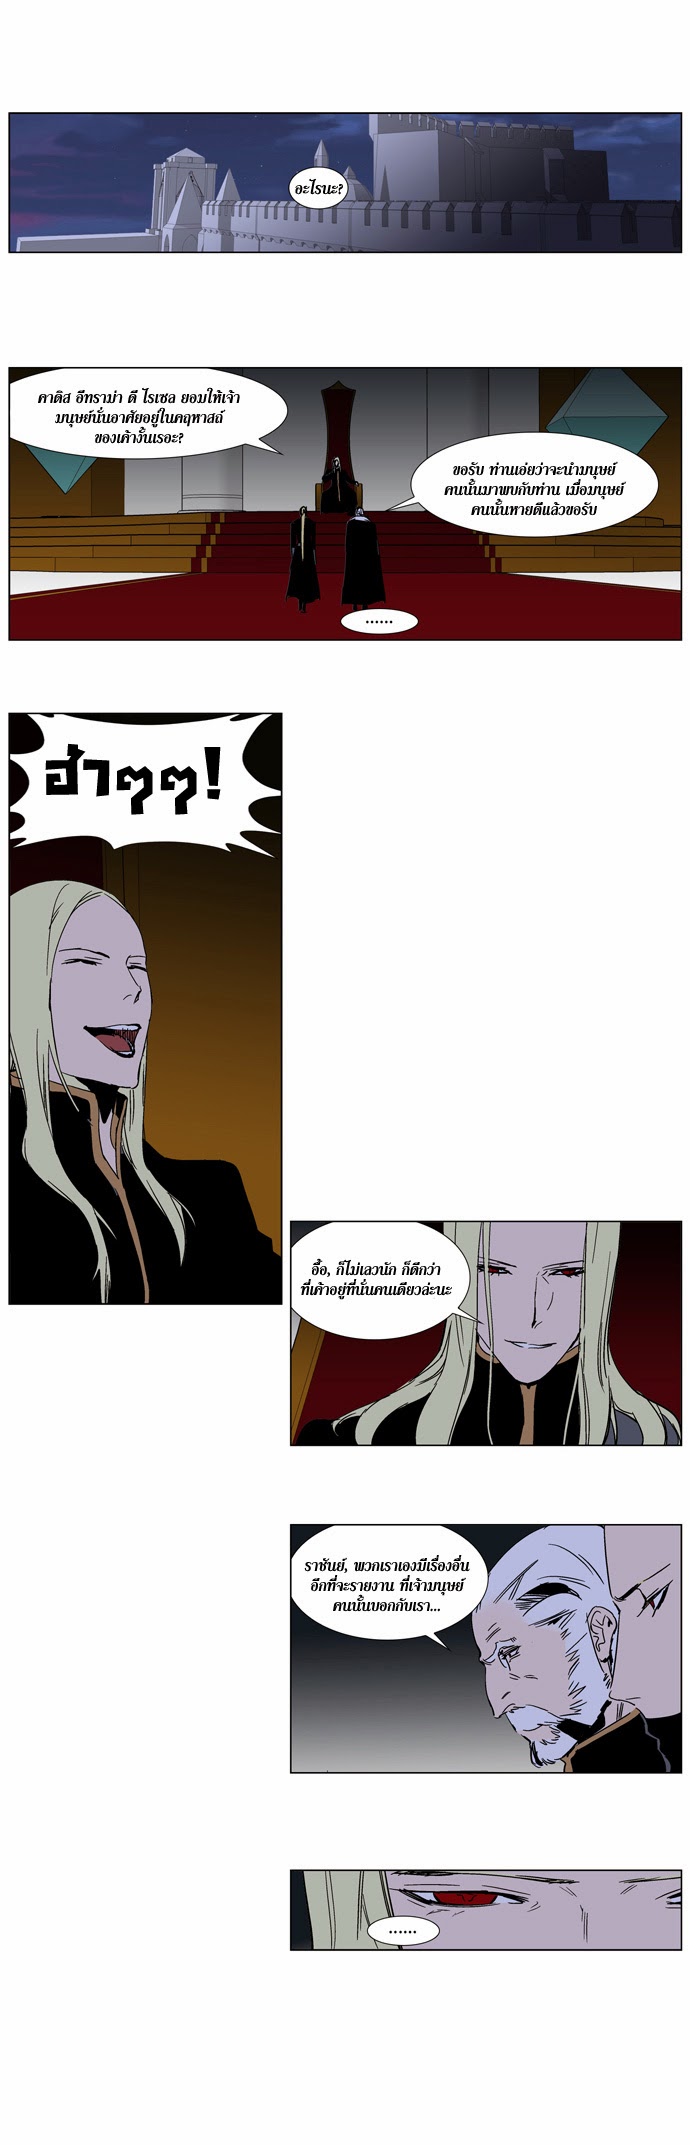 Noblesse 244 015